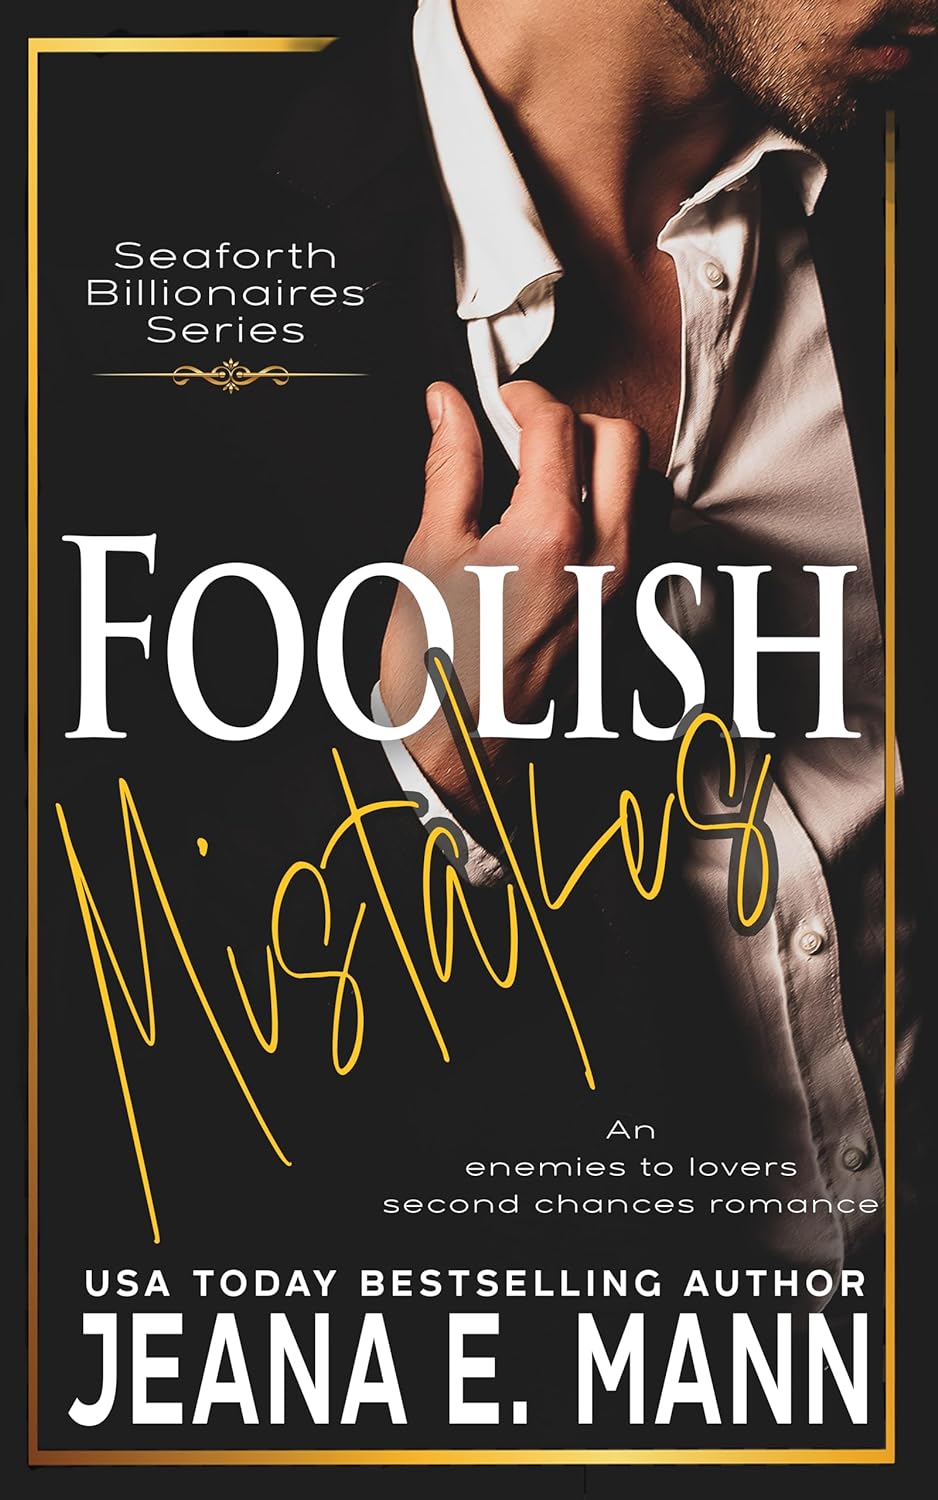 Foolish Mistakes: Enemies to Lovers Billionaire Romance by USA Today Bestselling Author Jeana E Mann